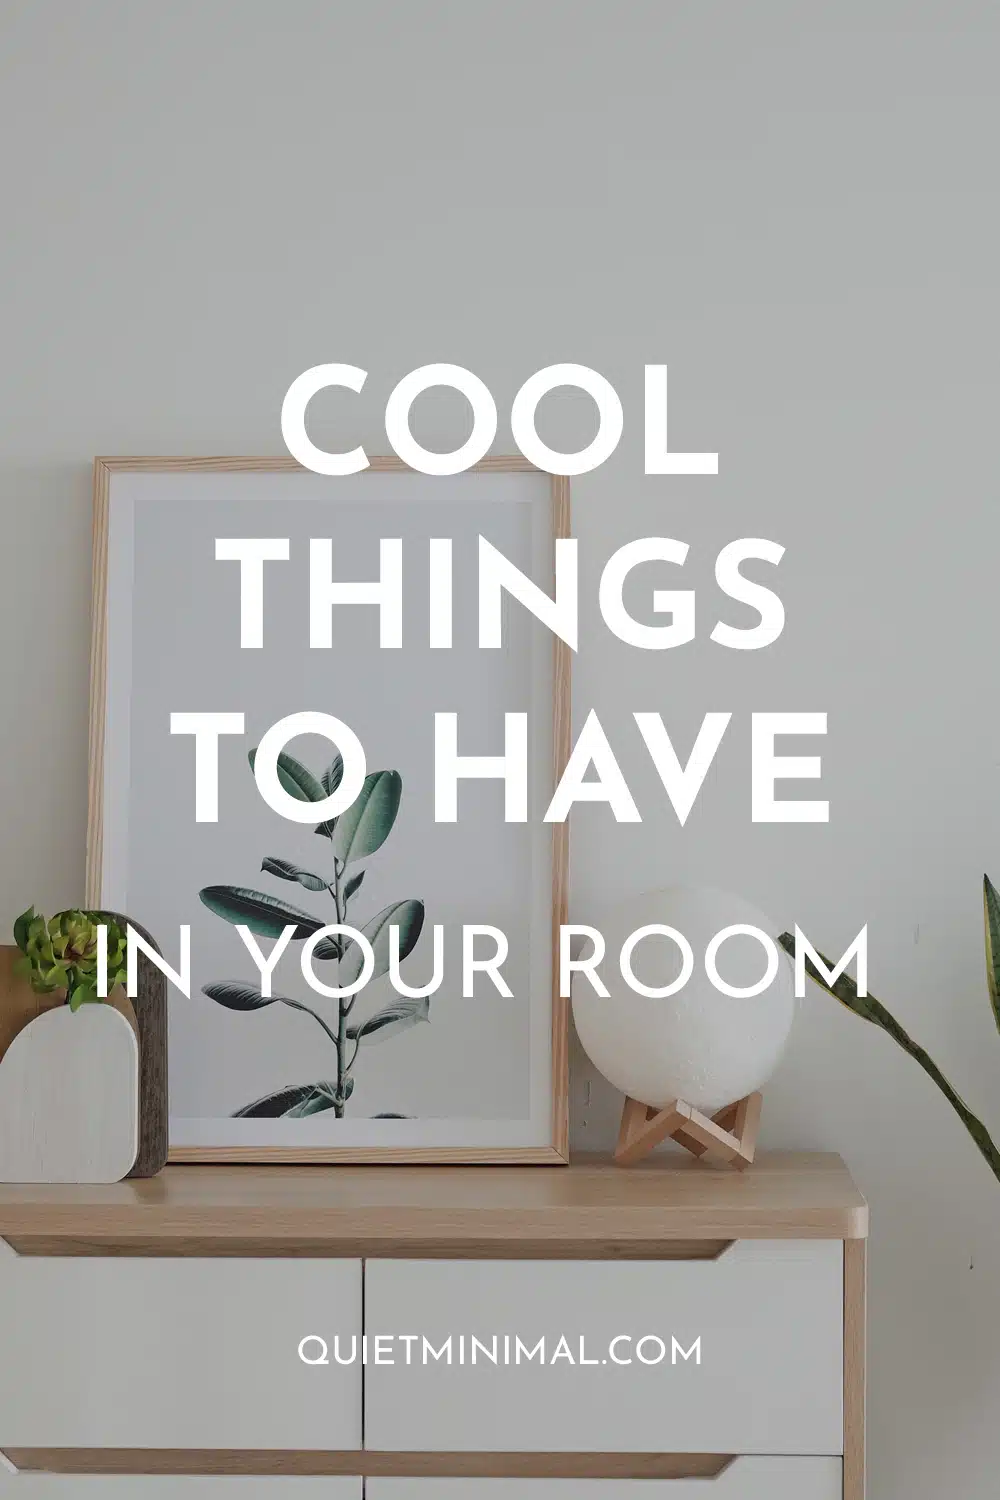 A list of cool things to have in your room